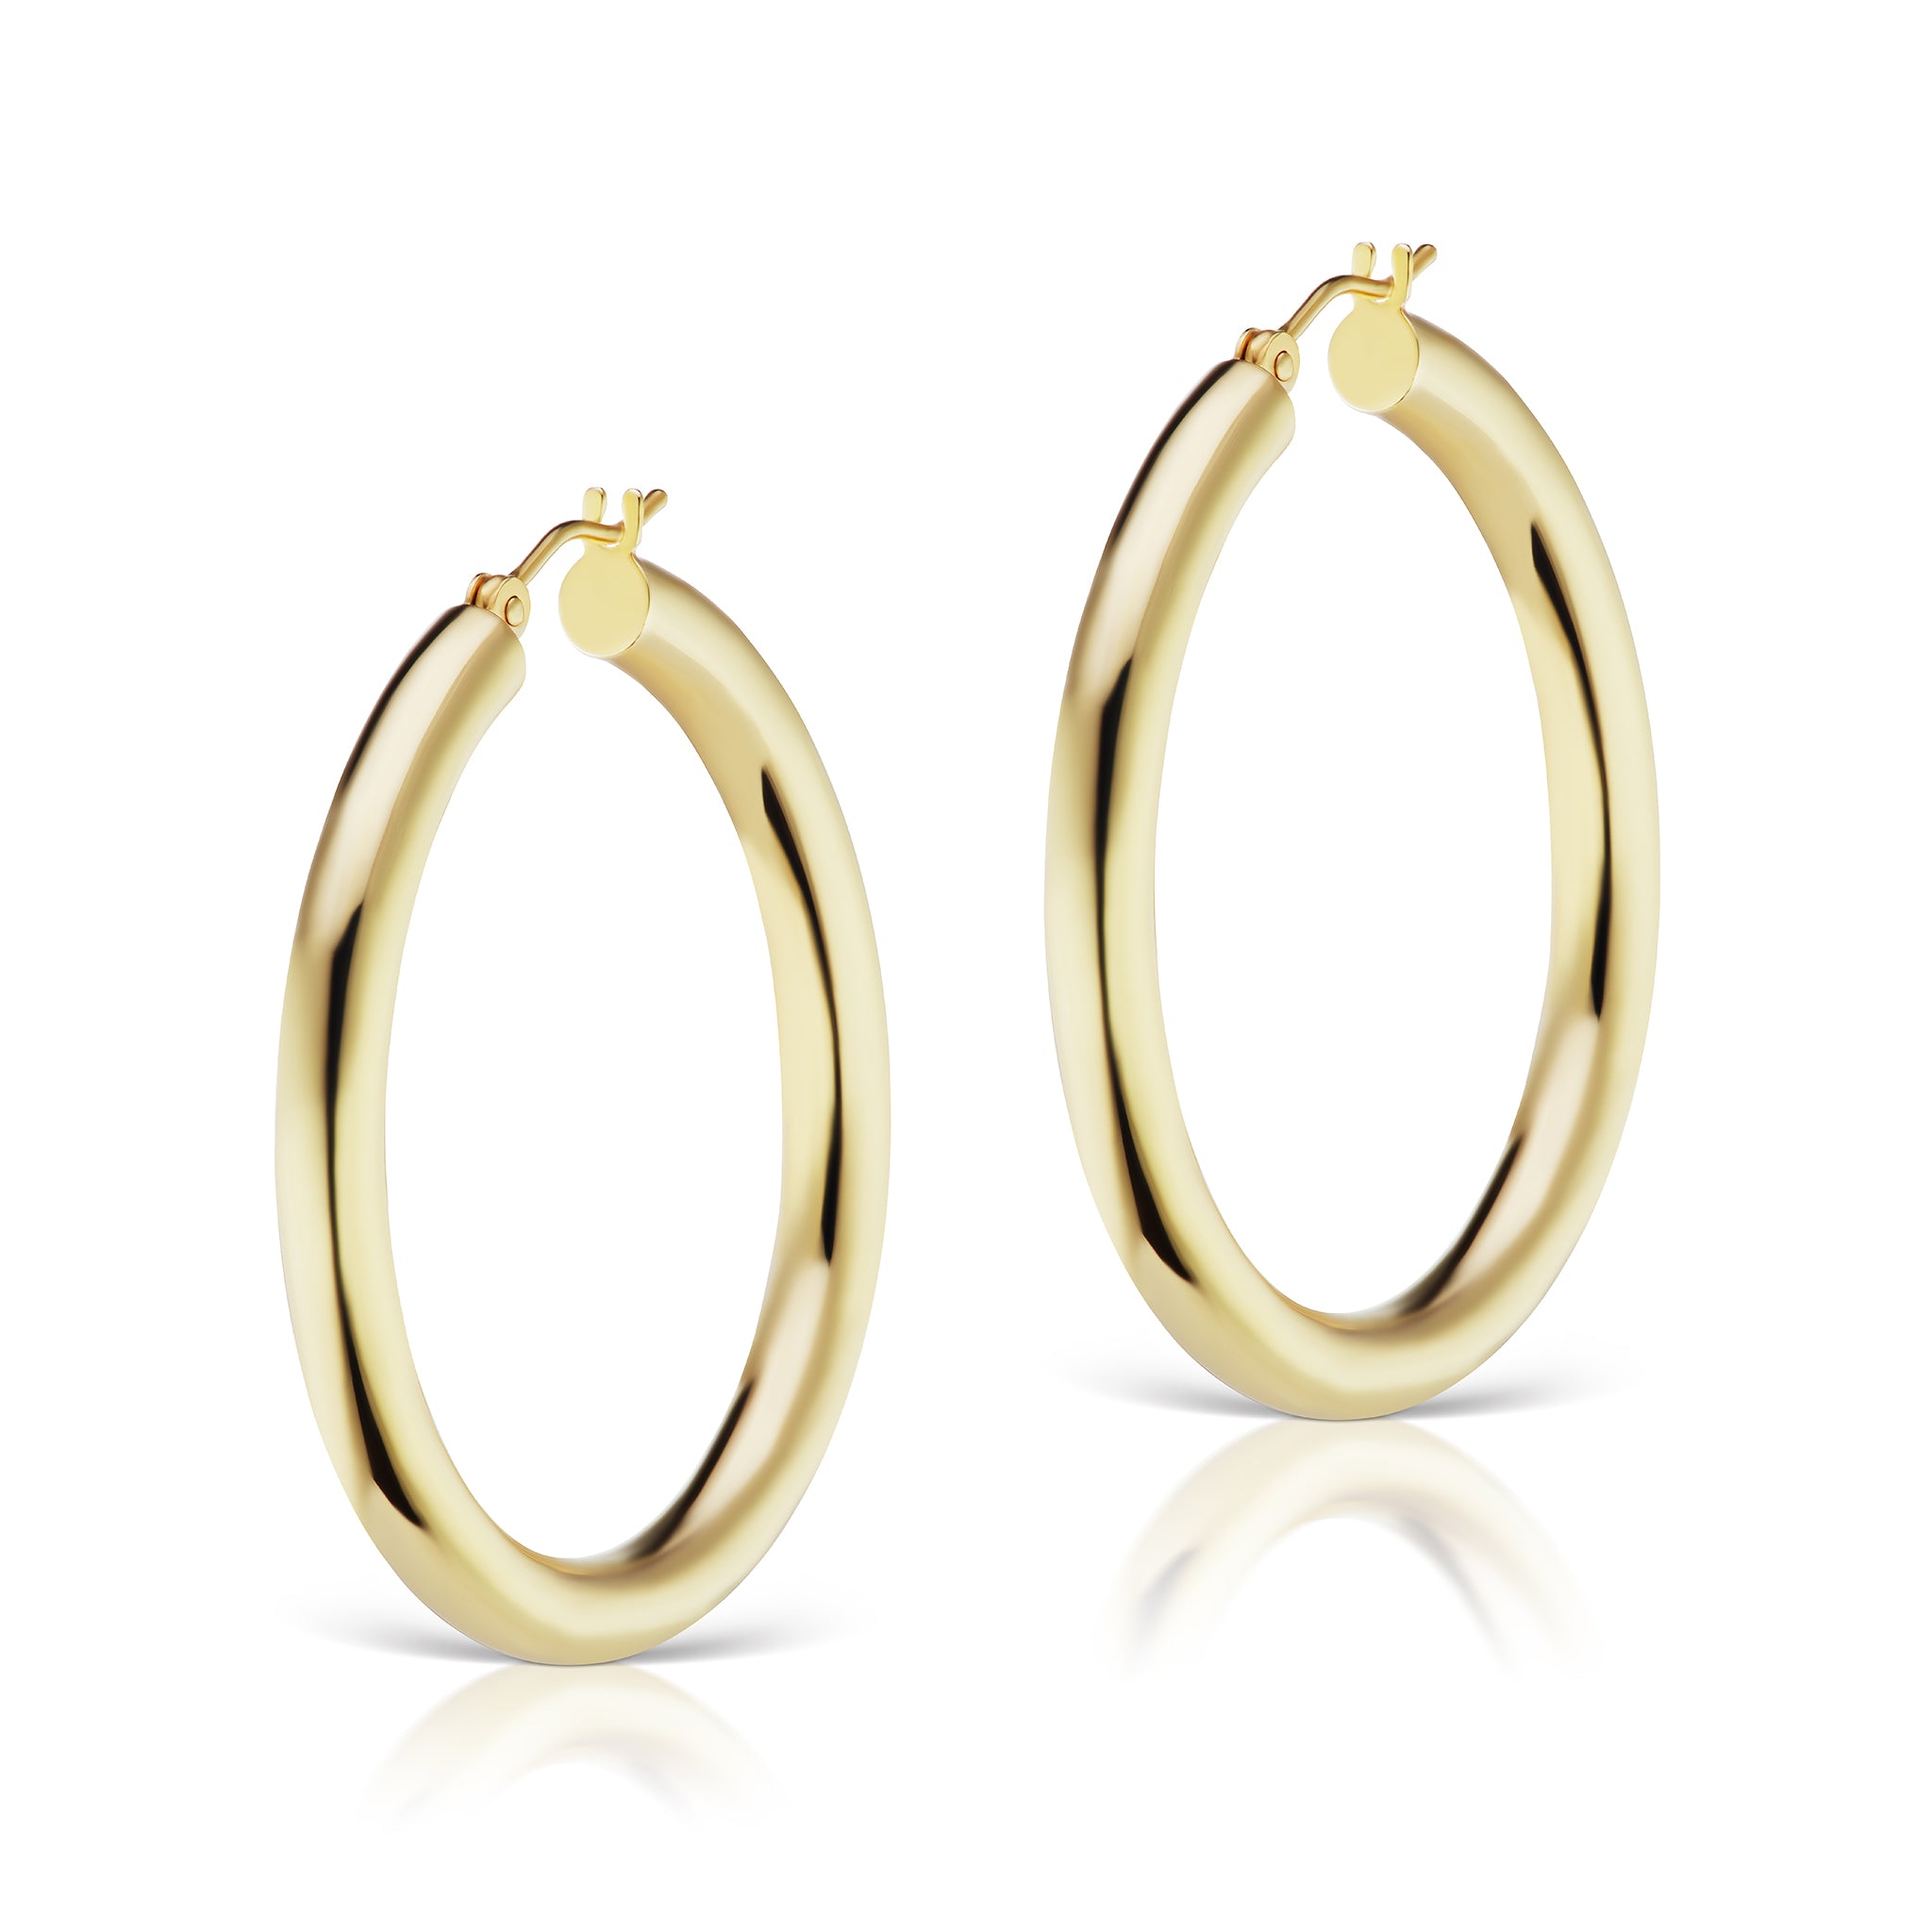 The Gold Large Hollow Hoop